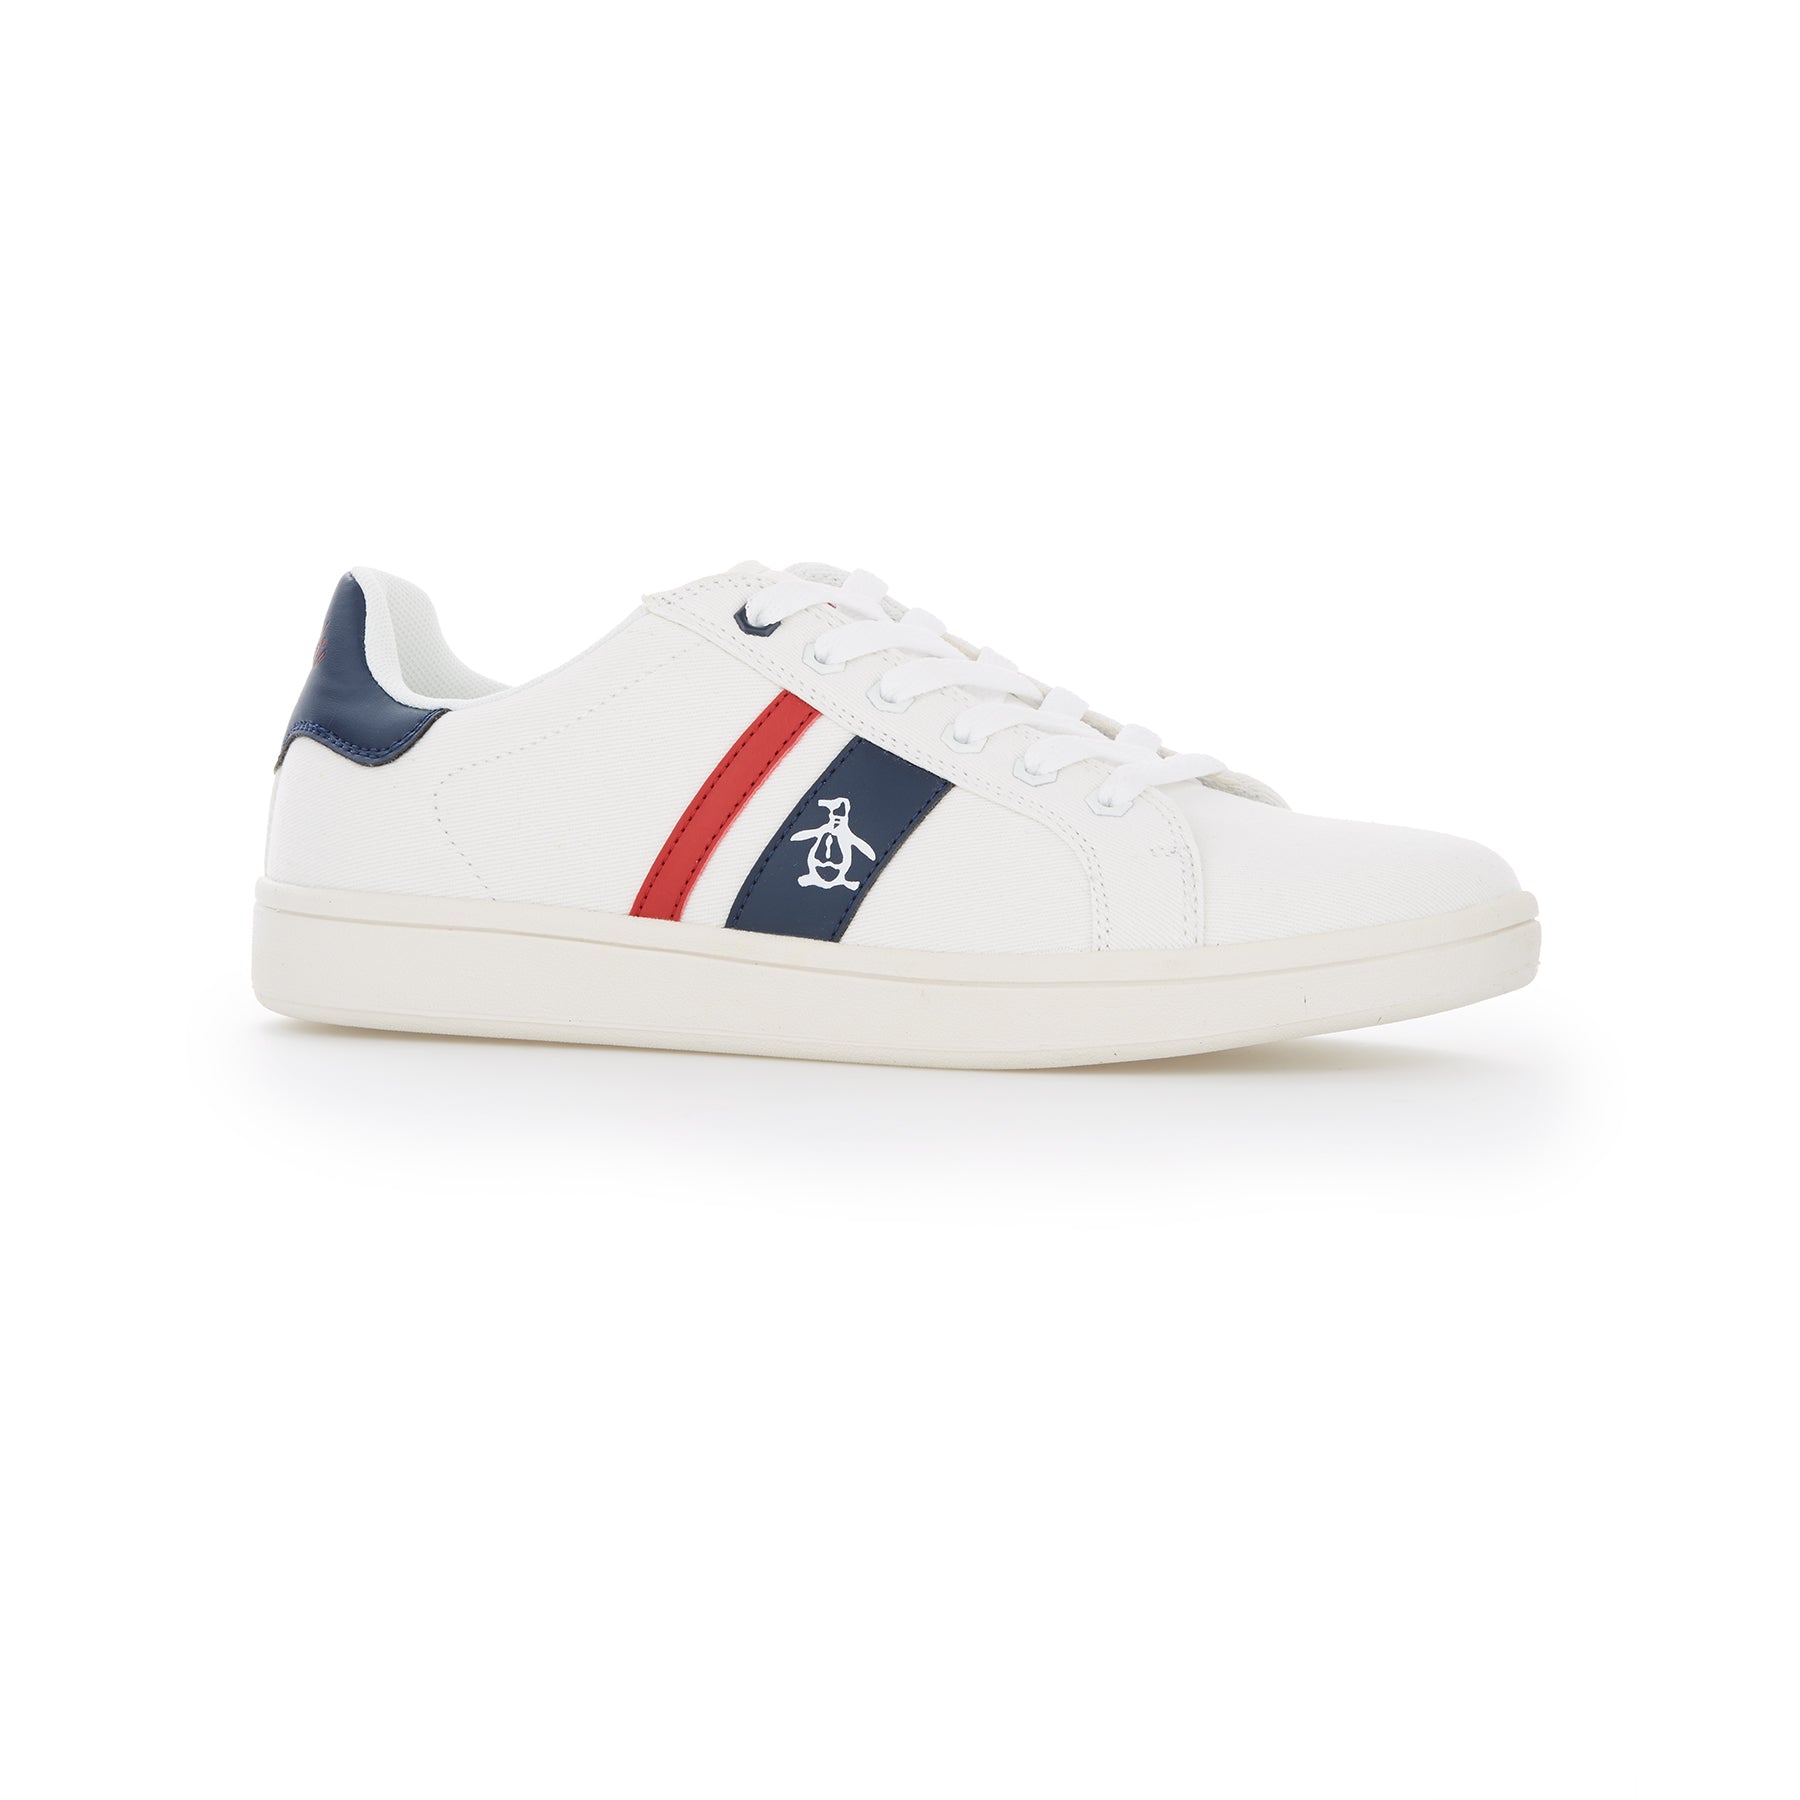 View Steadman Striped Trainers In NavyWhite information